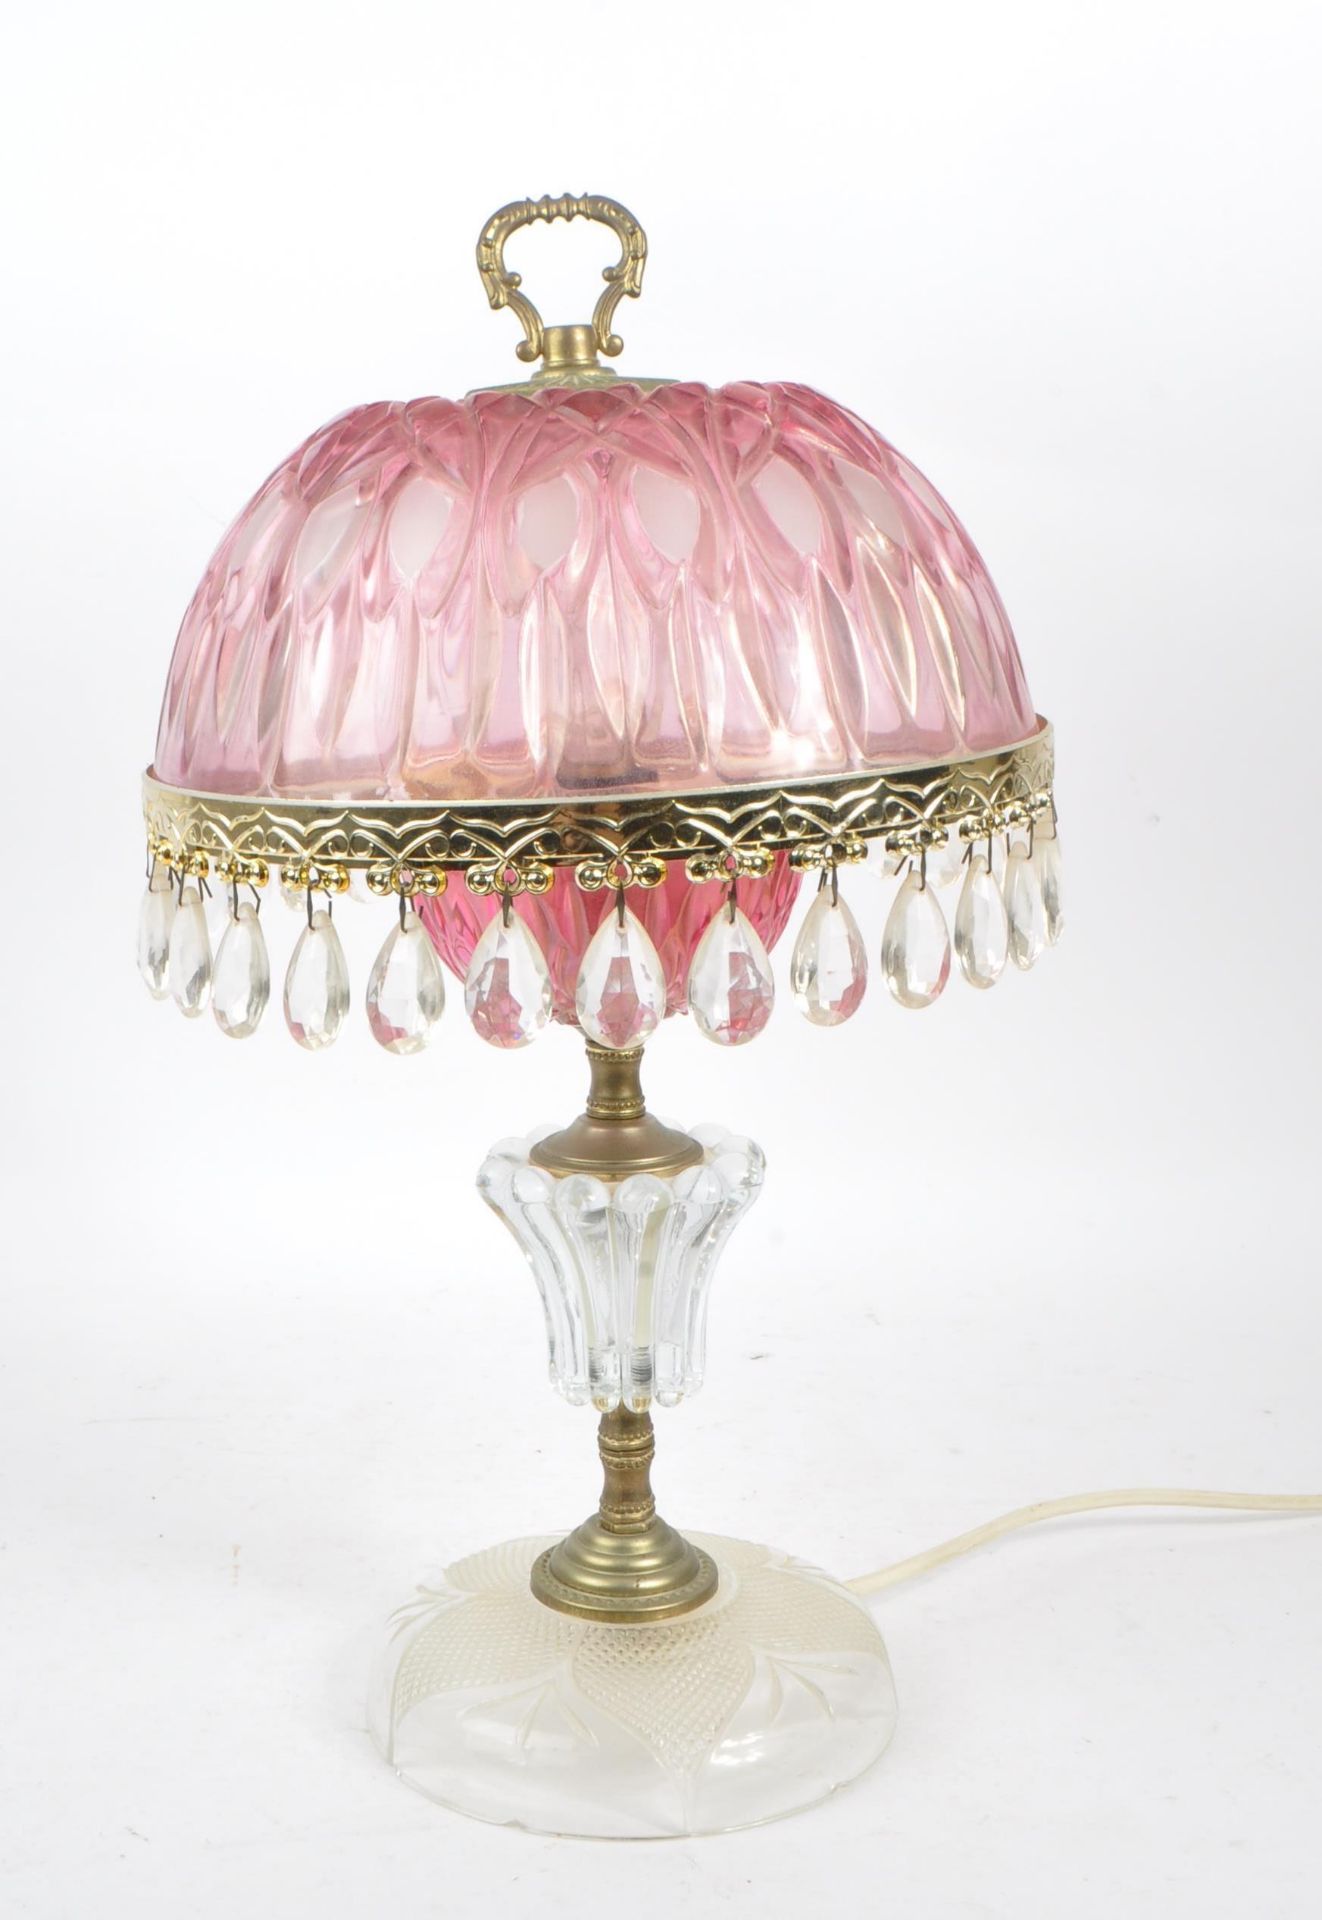 MICHELOTTI - VINTAGE CRYSTAL CRANBERRY PARLOUR LAMP - Image 2 of 5